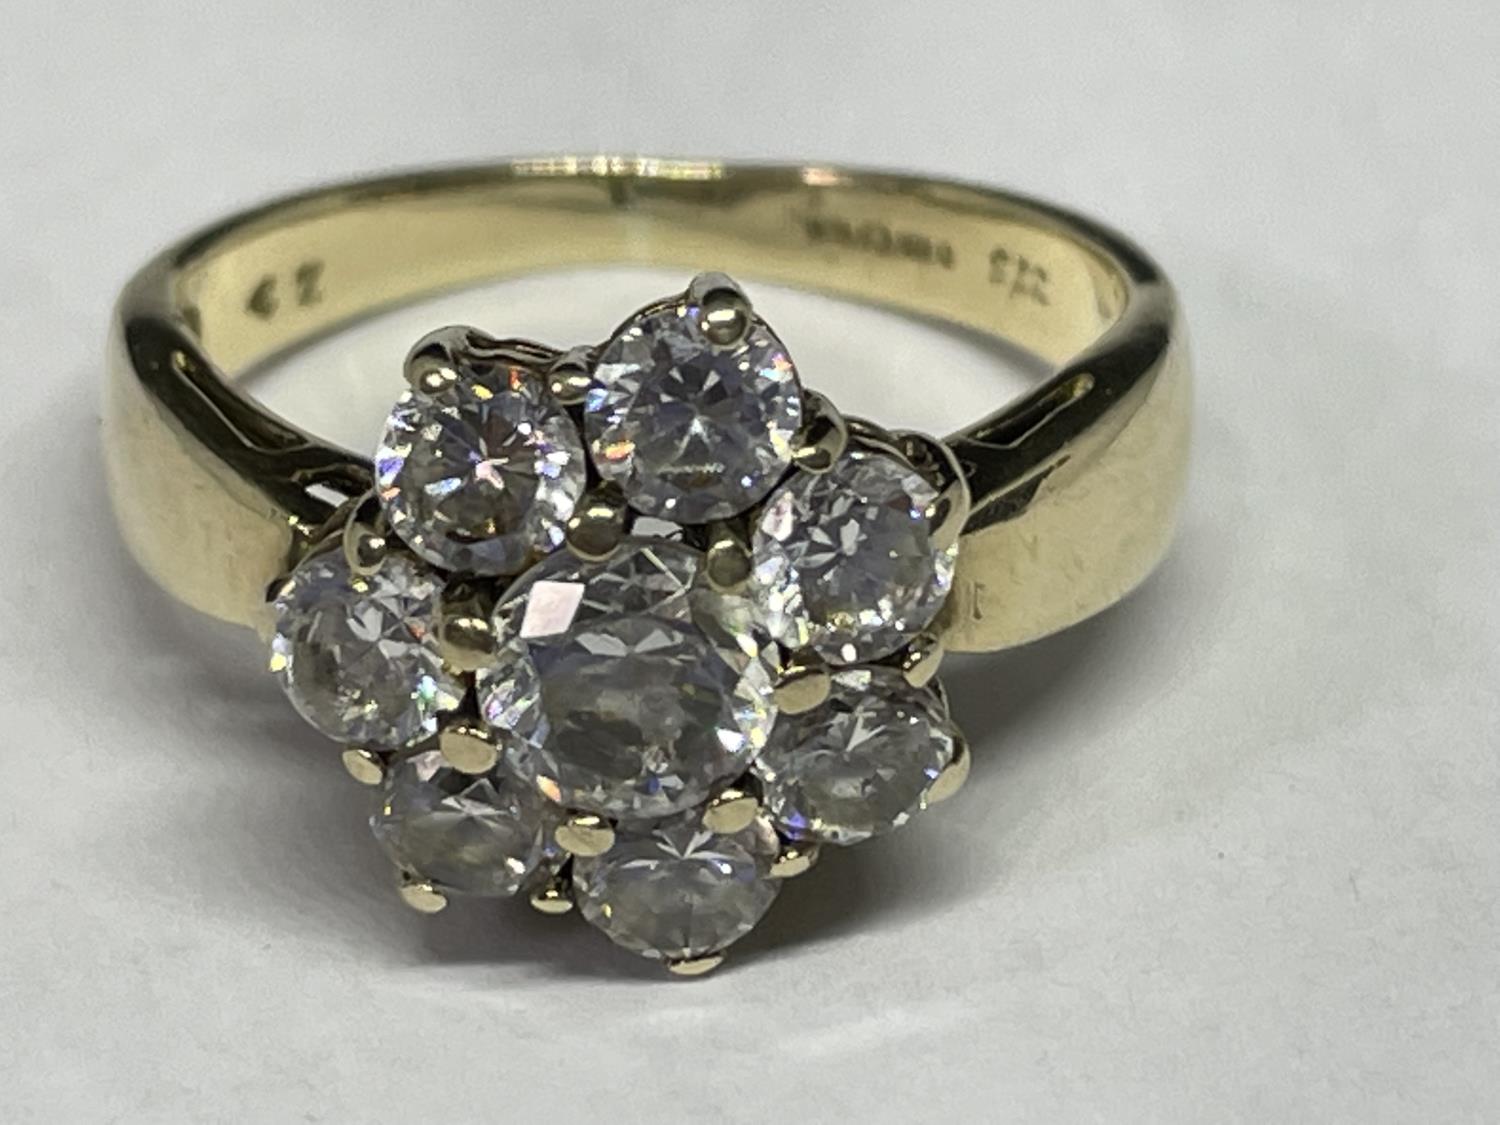 A 9 CARAT GOLD RING WITH EIGHT CUBIC ZIRCONIA STONES IN A FLOWER DESIGN SIZE O